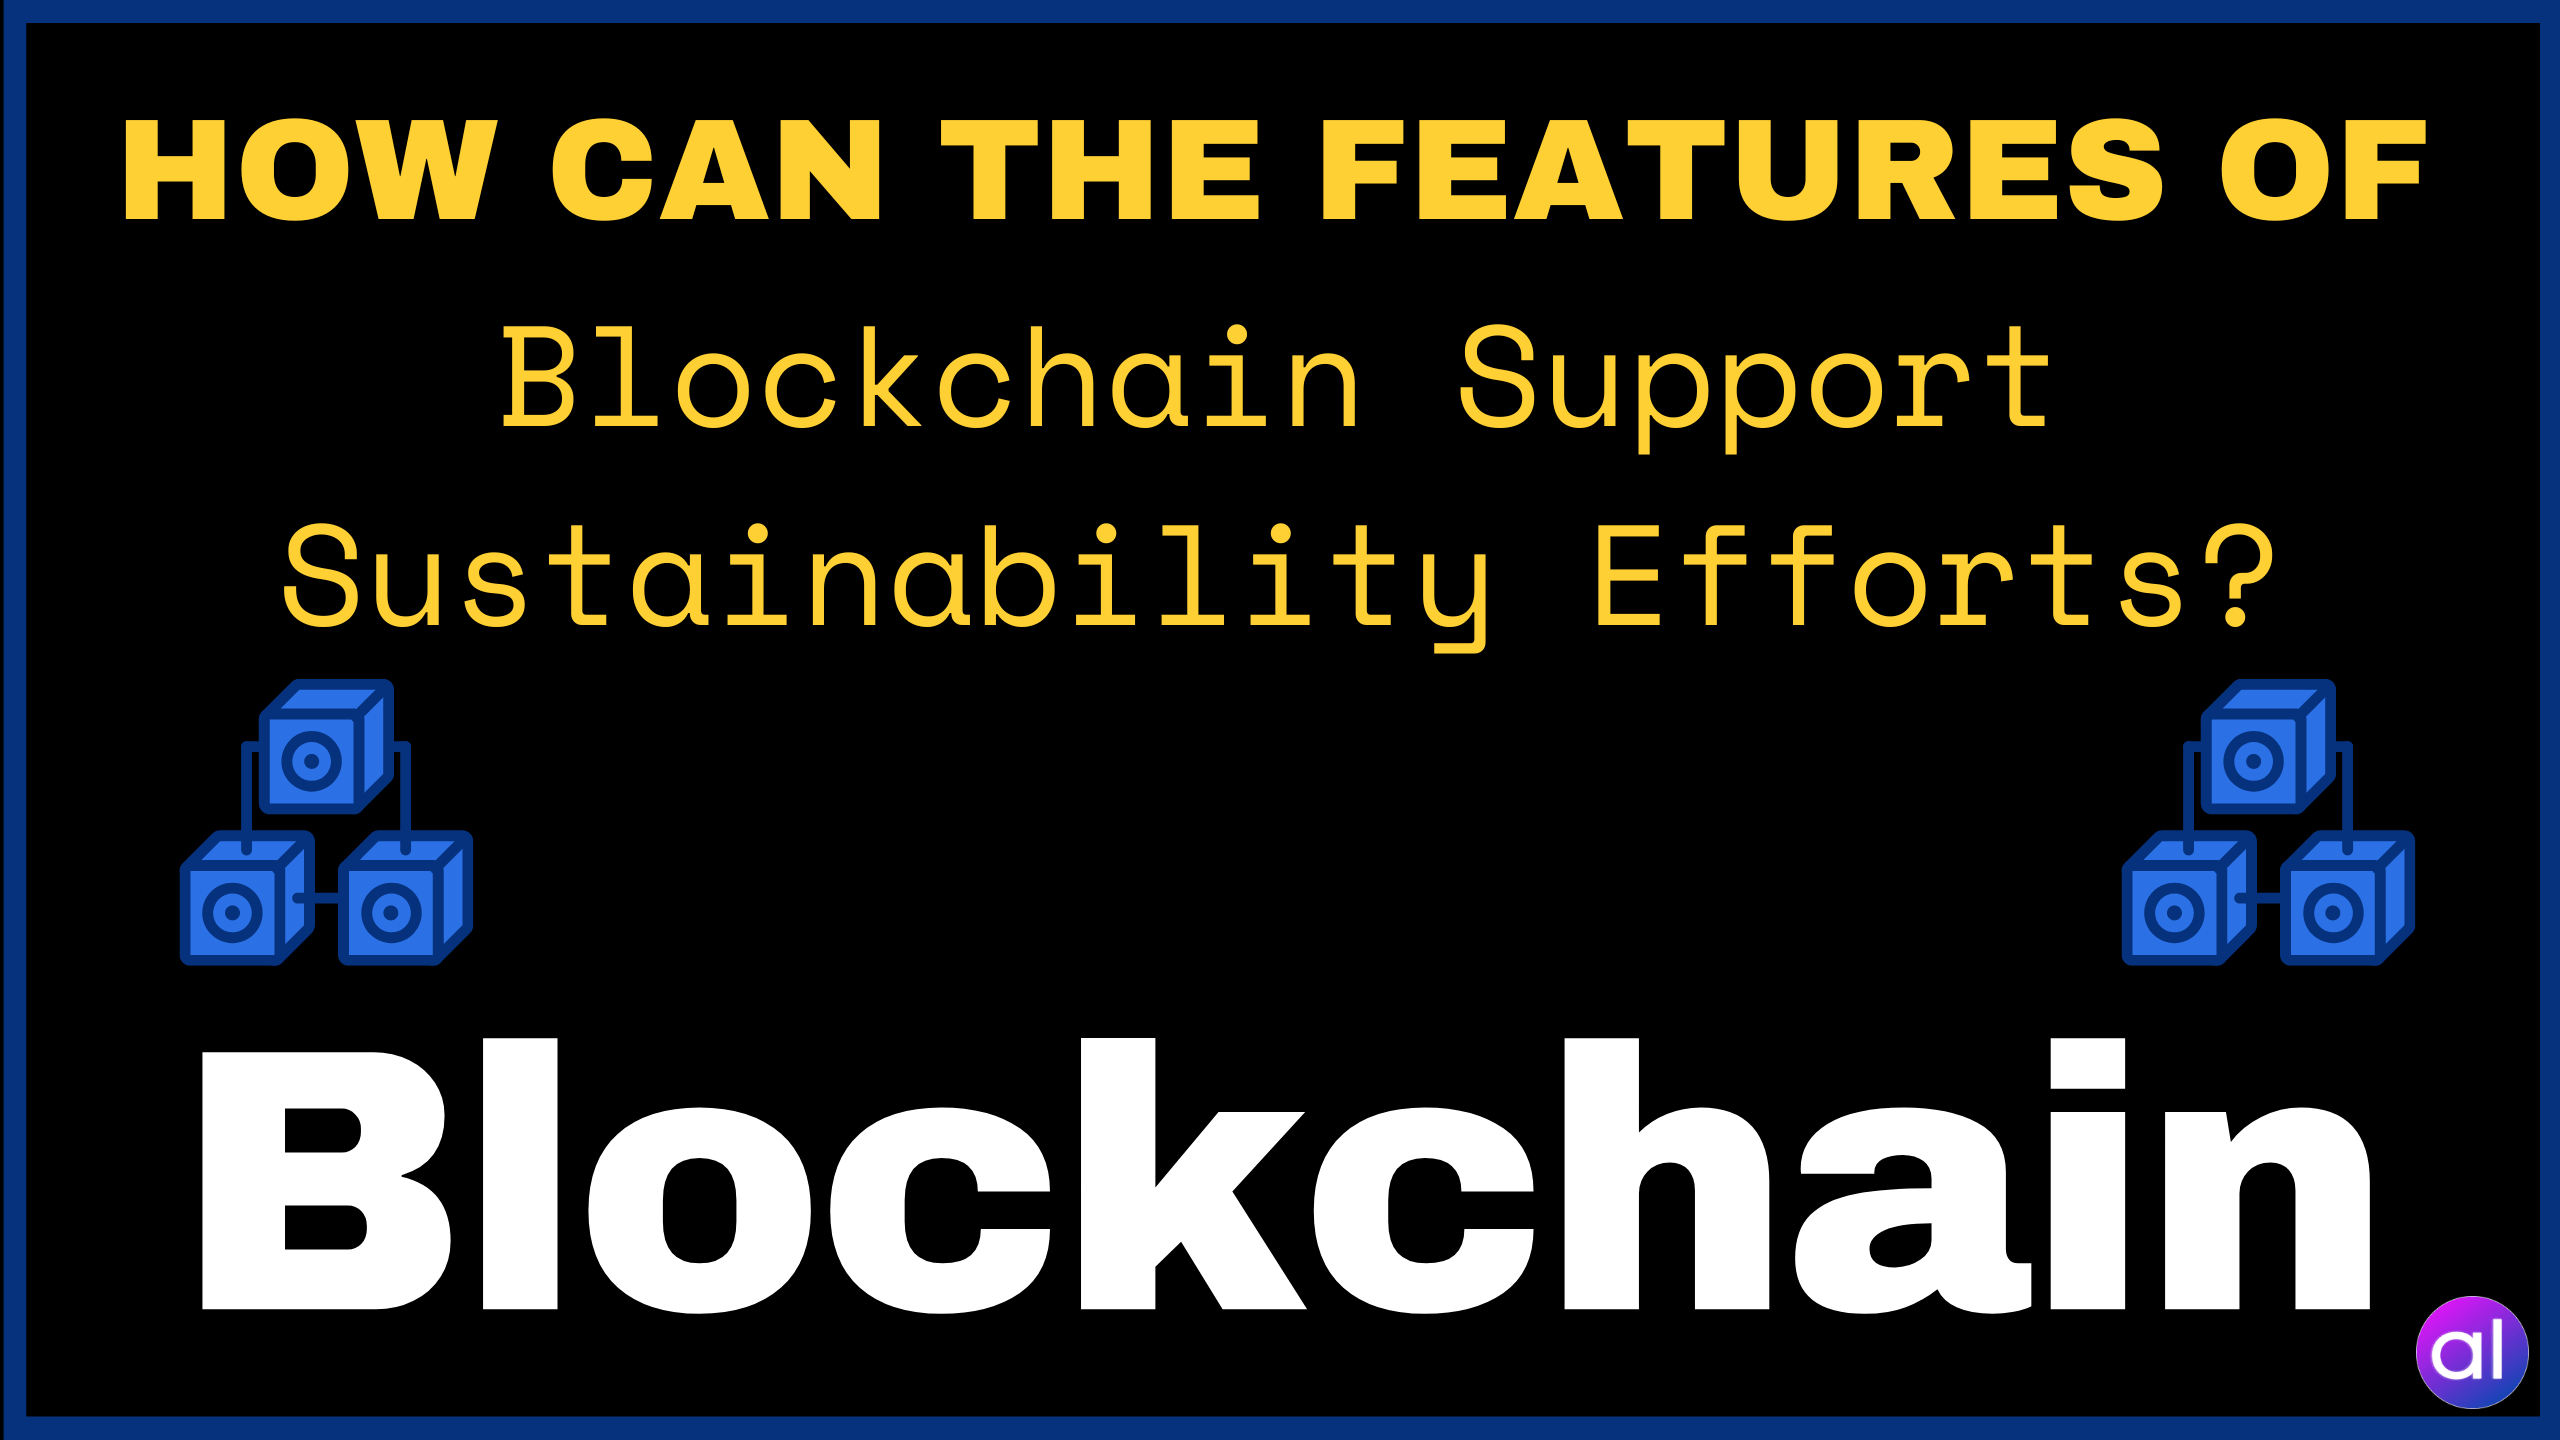 how can features of blockchain support sustainability efforts?